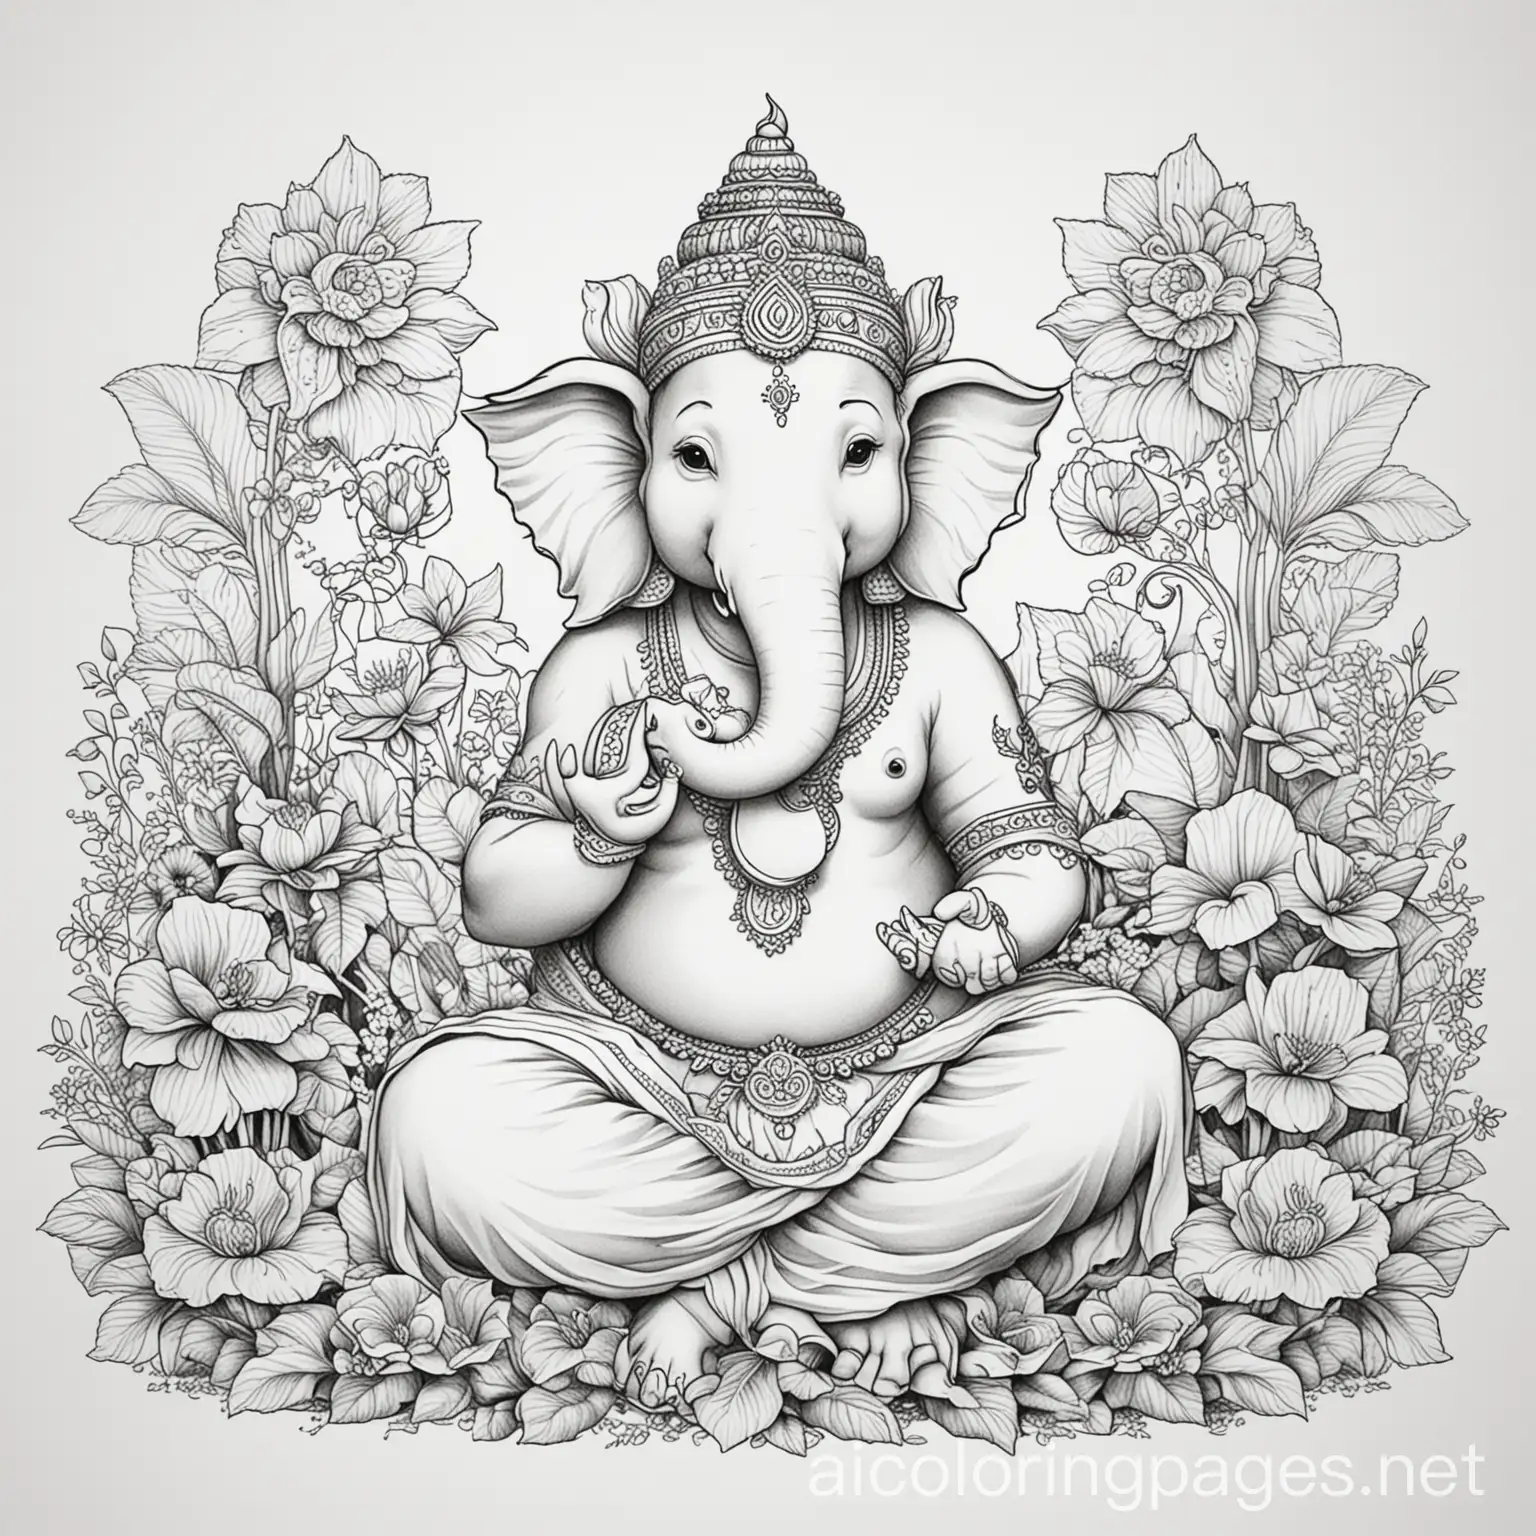 Ganesh-Sitting-in-a-Garden-Surrounded-by-Flowers-Coloring-Page